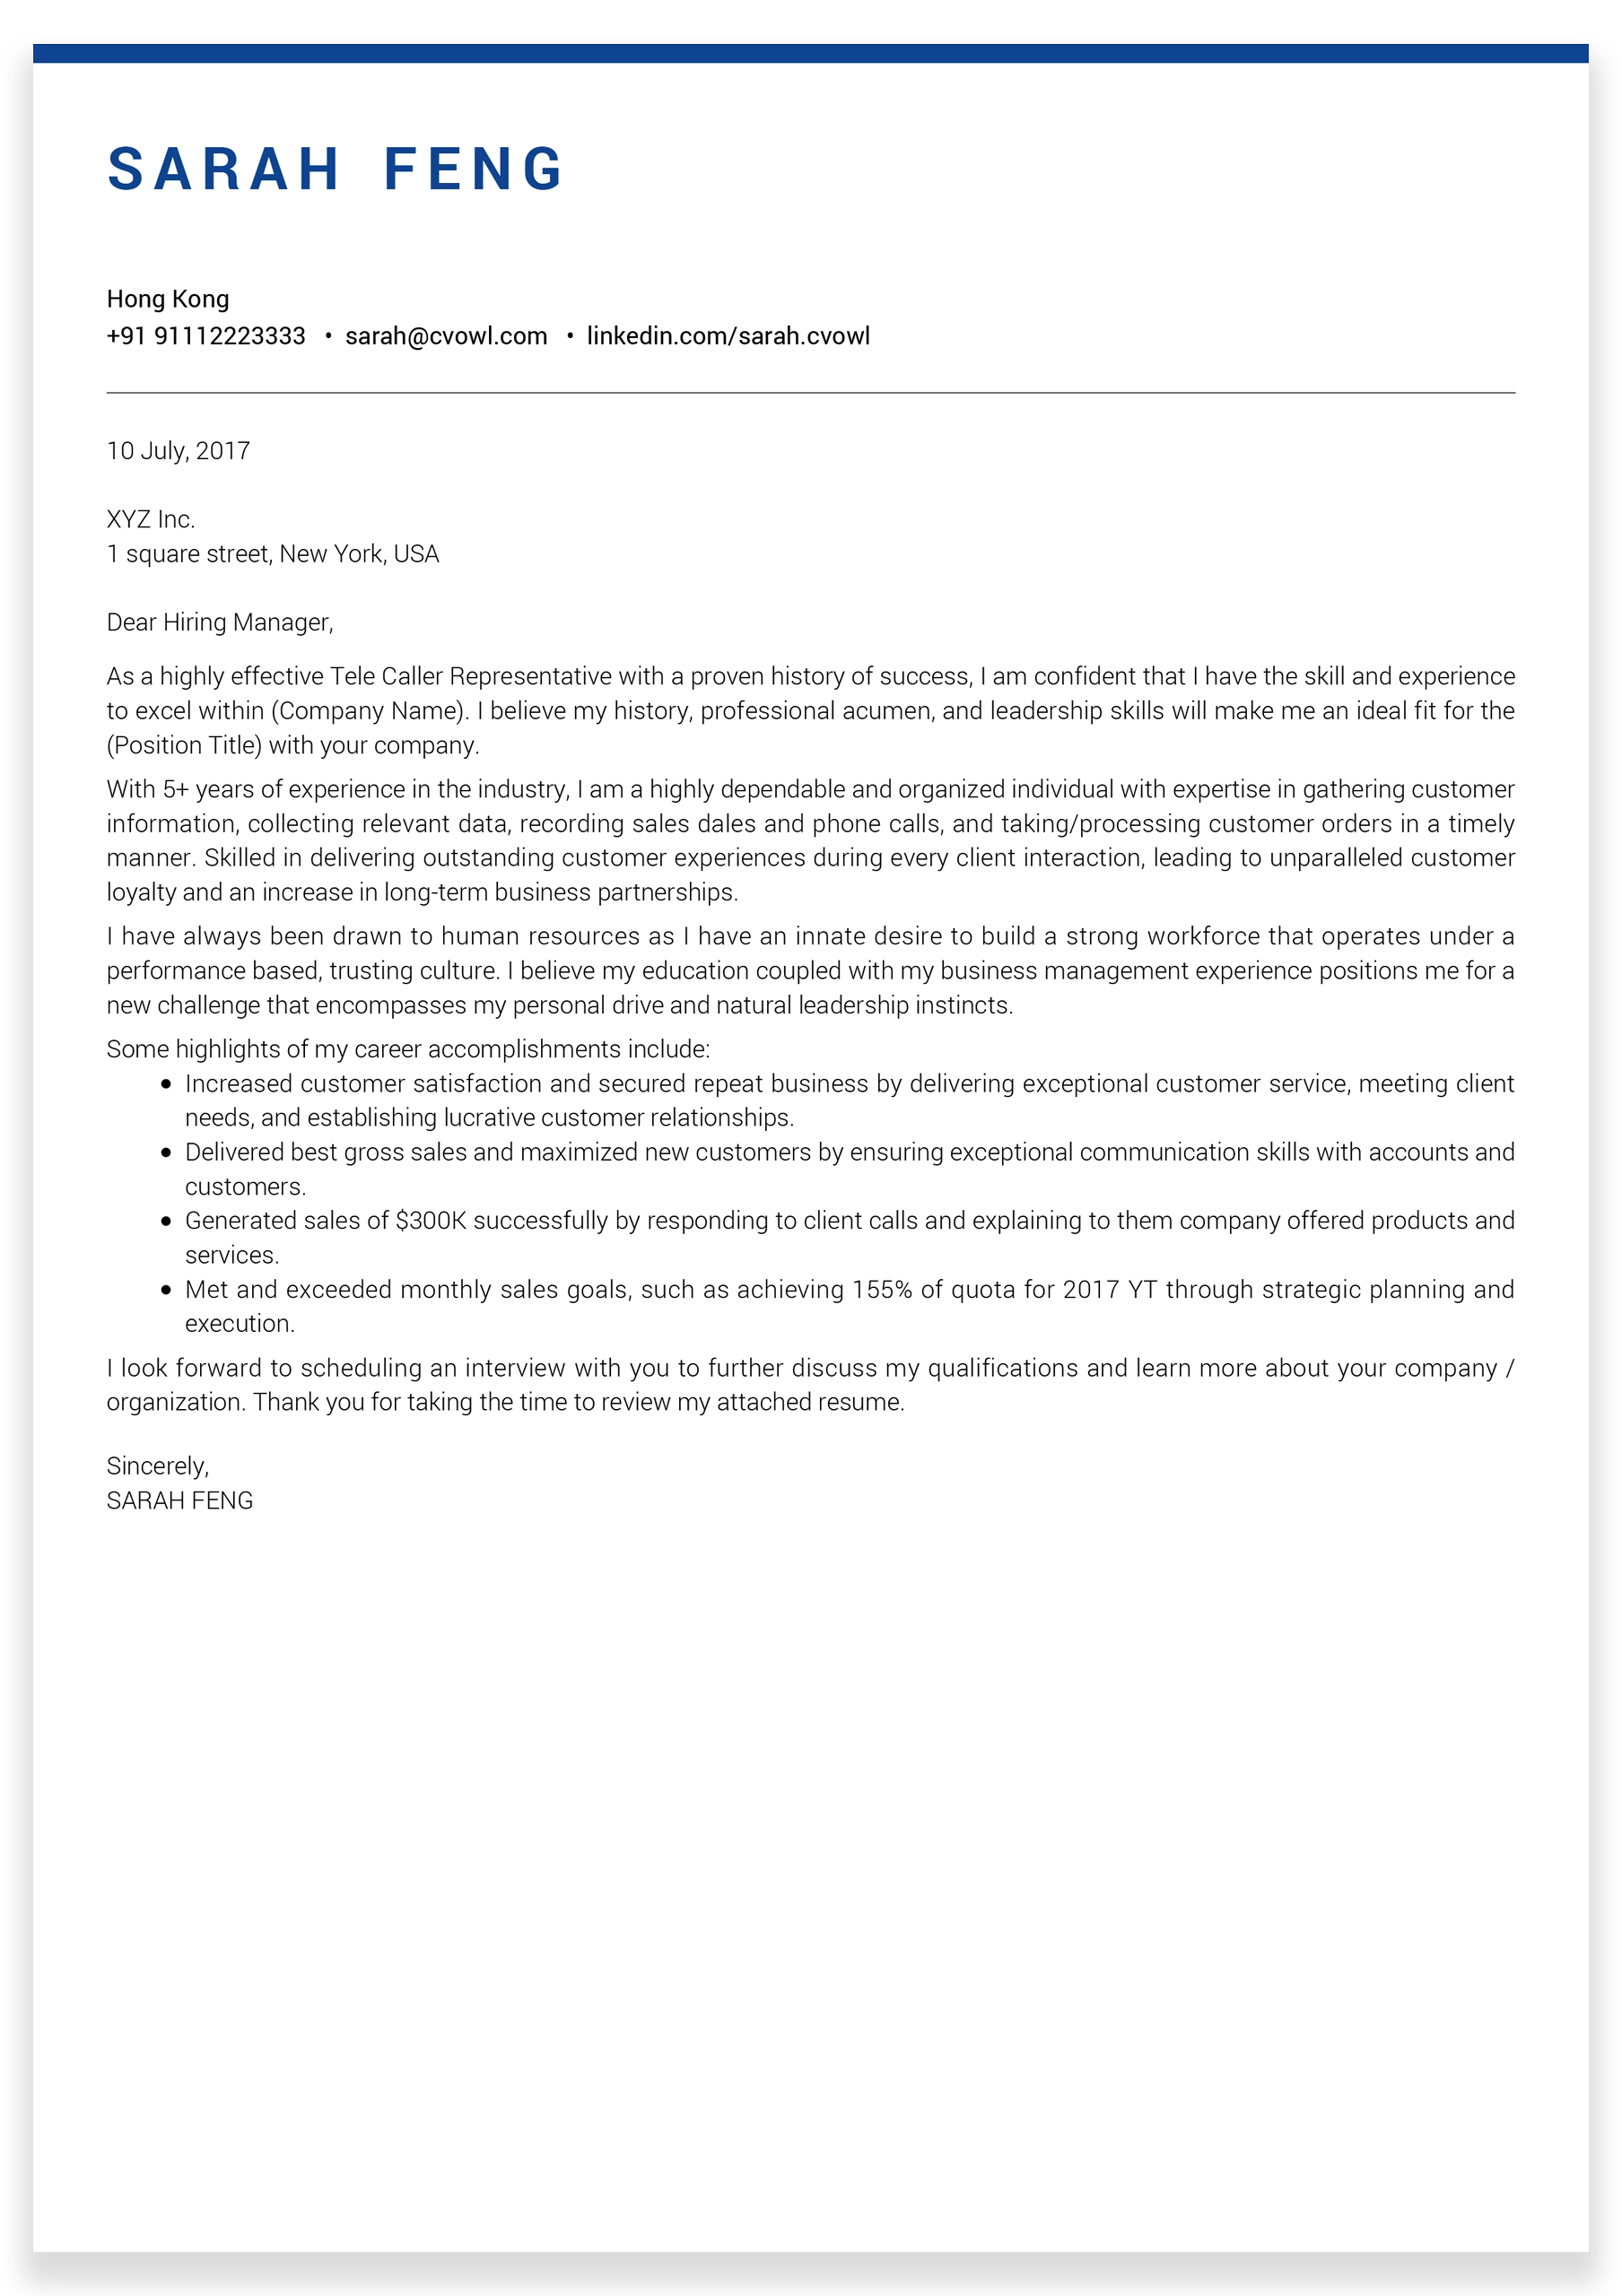 Security-Analyst-Cover-Letter-sample13